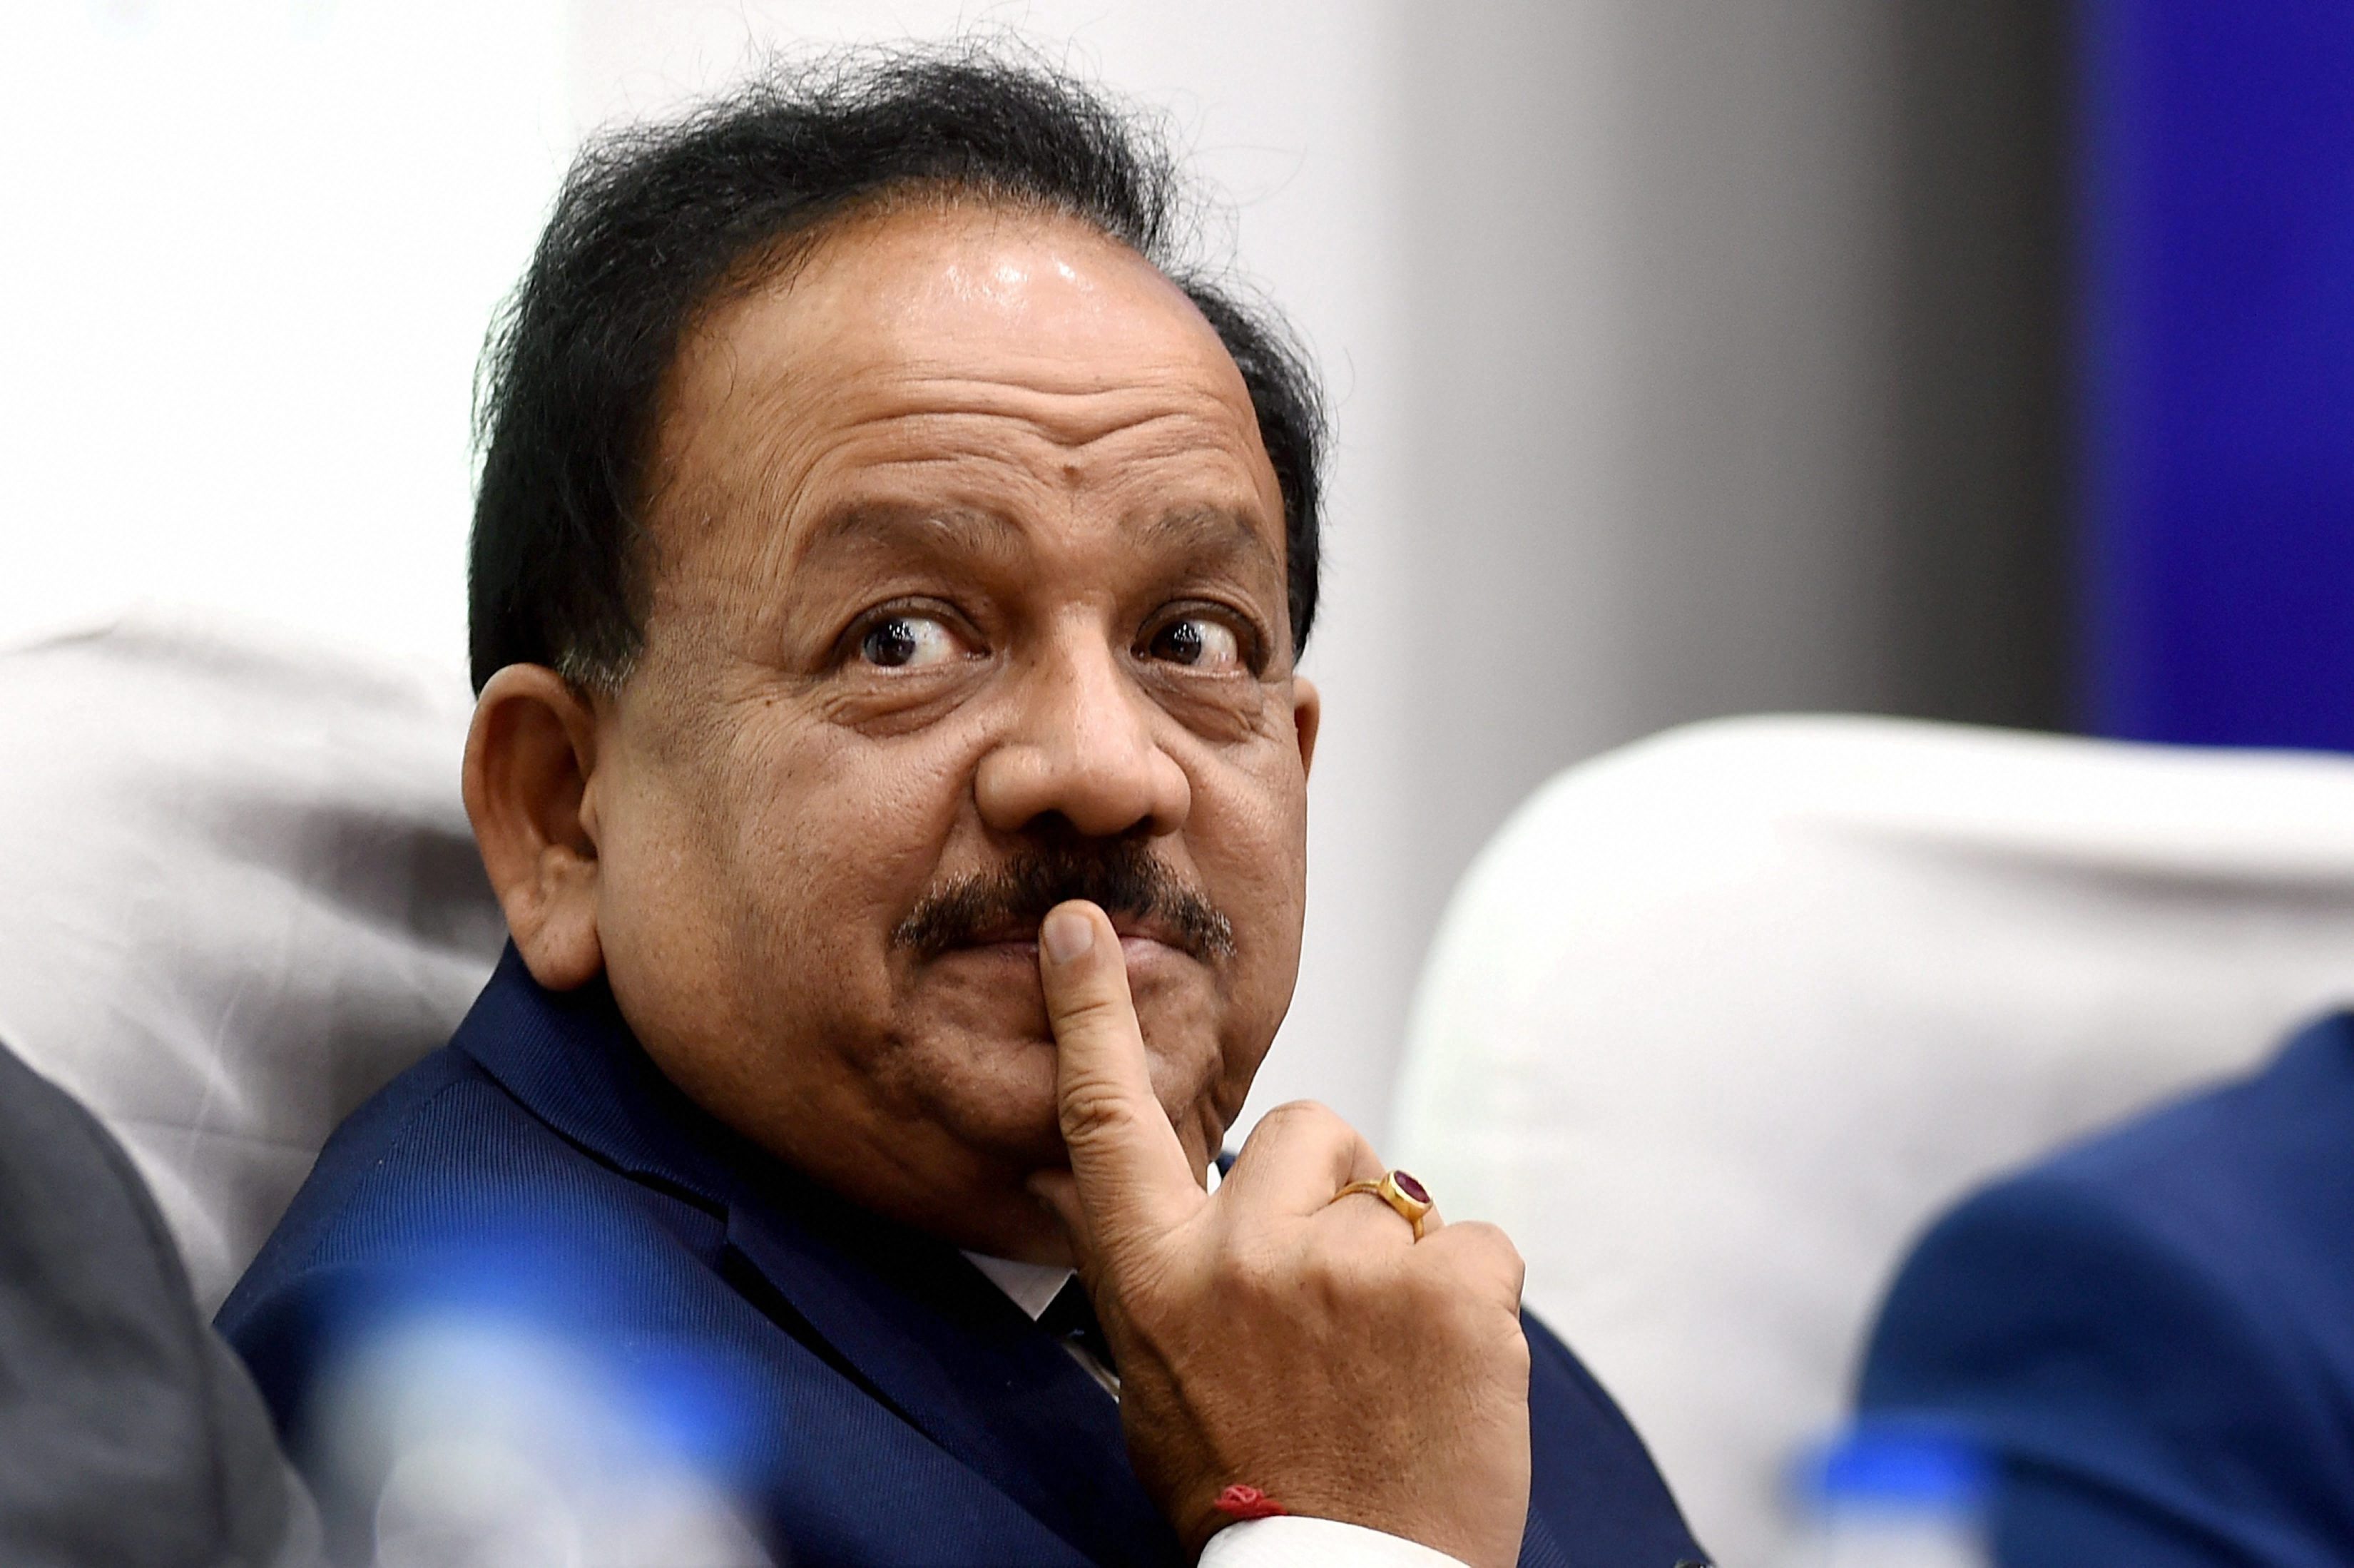 Former Union Minister Harsh Vardhan walks out of Delhi LG’s swearing-in ceremony